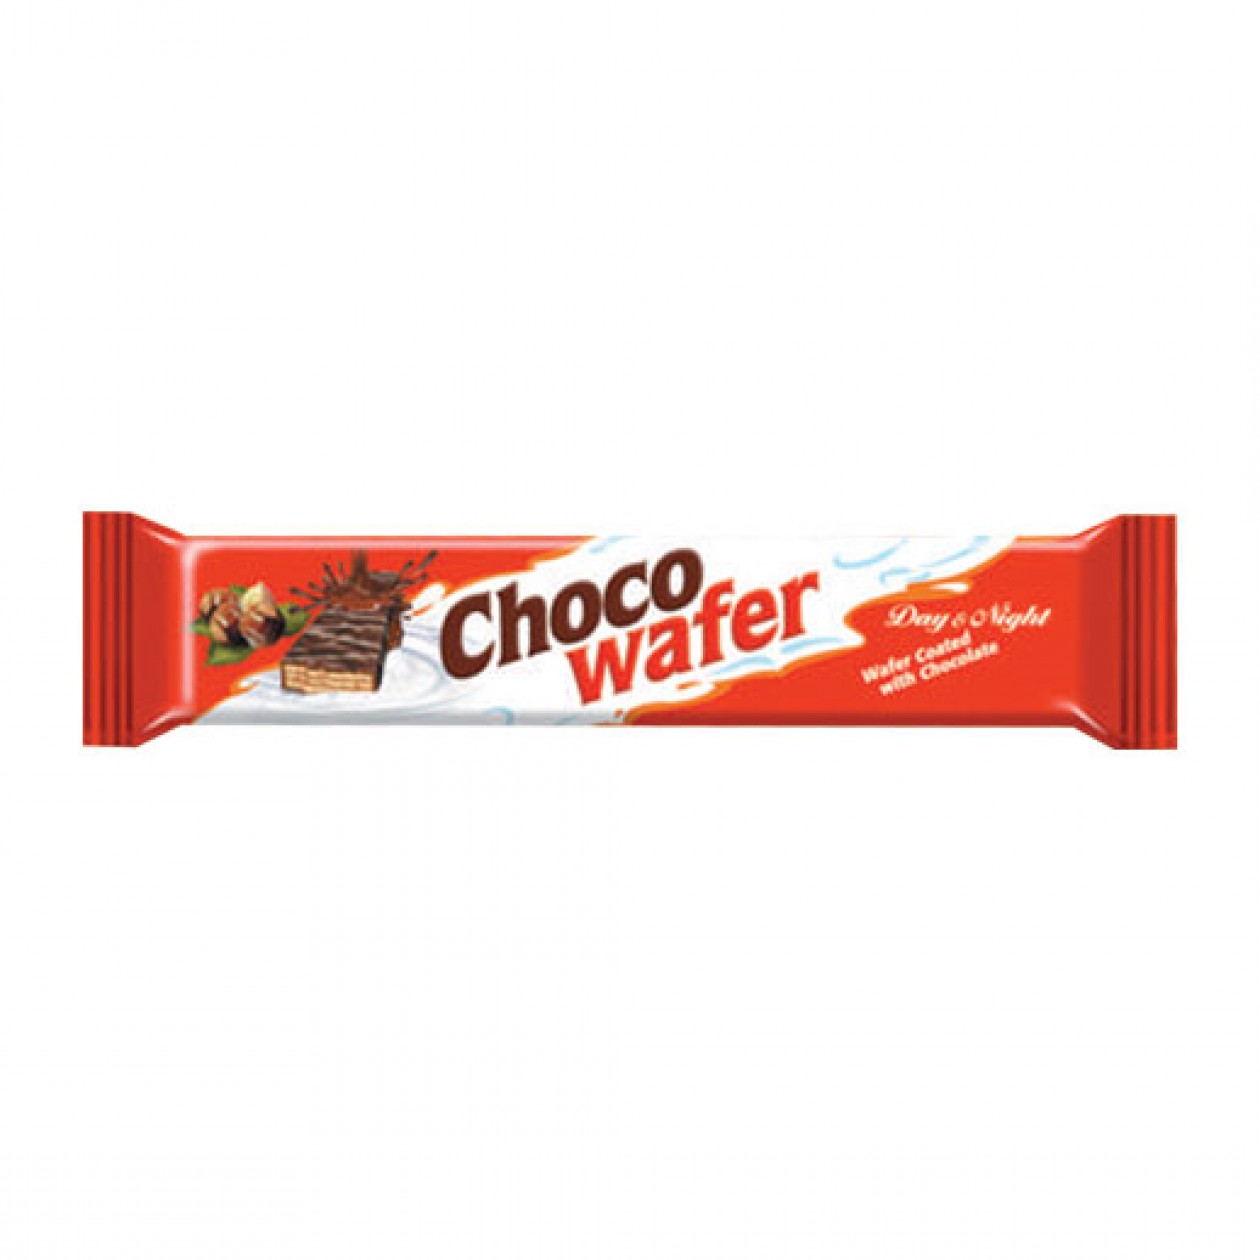 Borovets Wafer Milky Choco Coated 24 x 60g